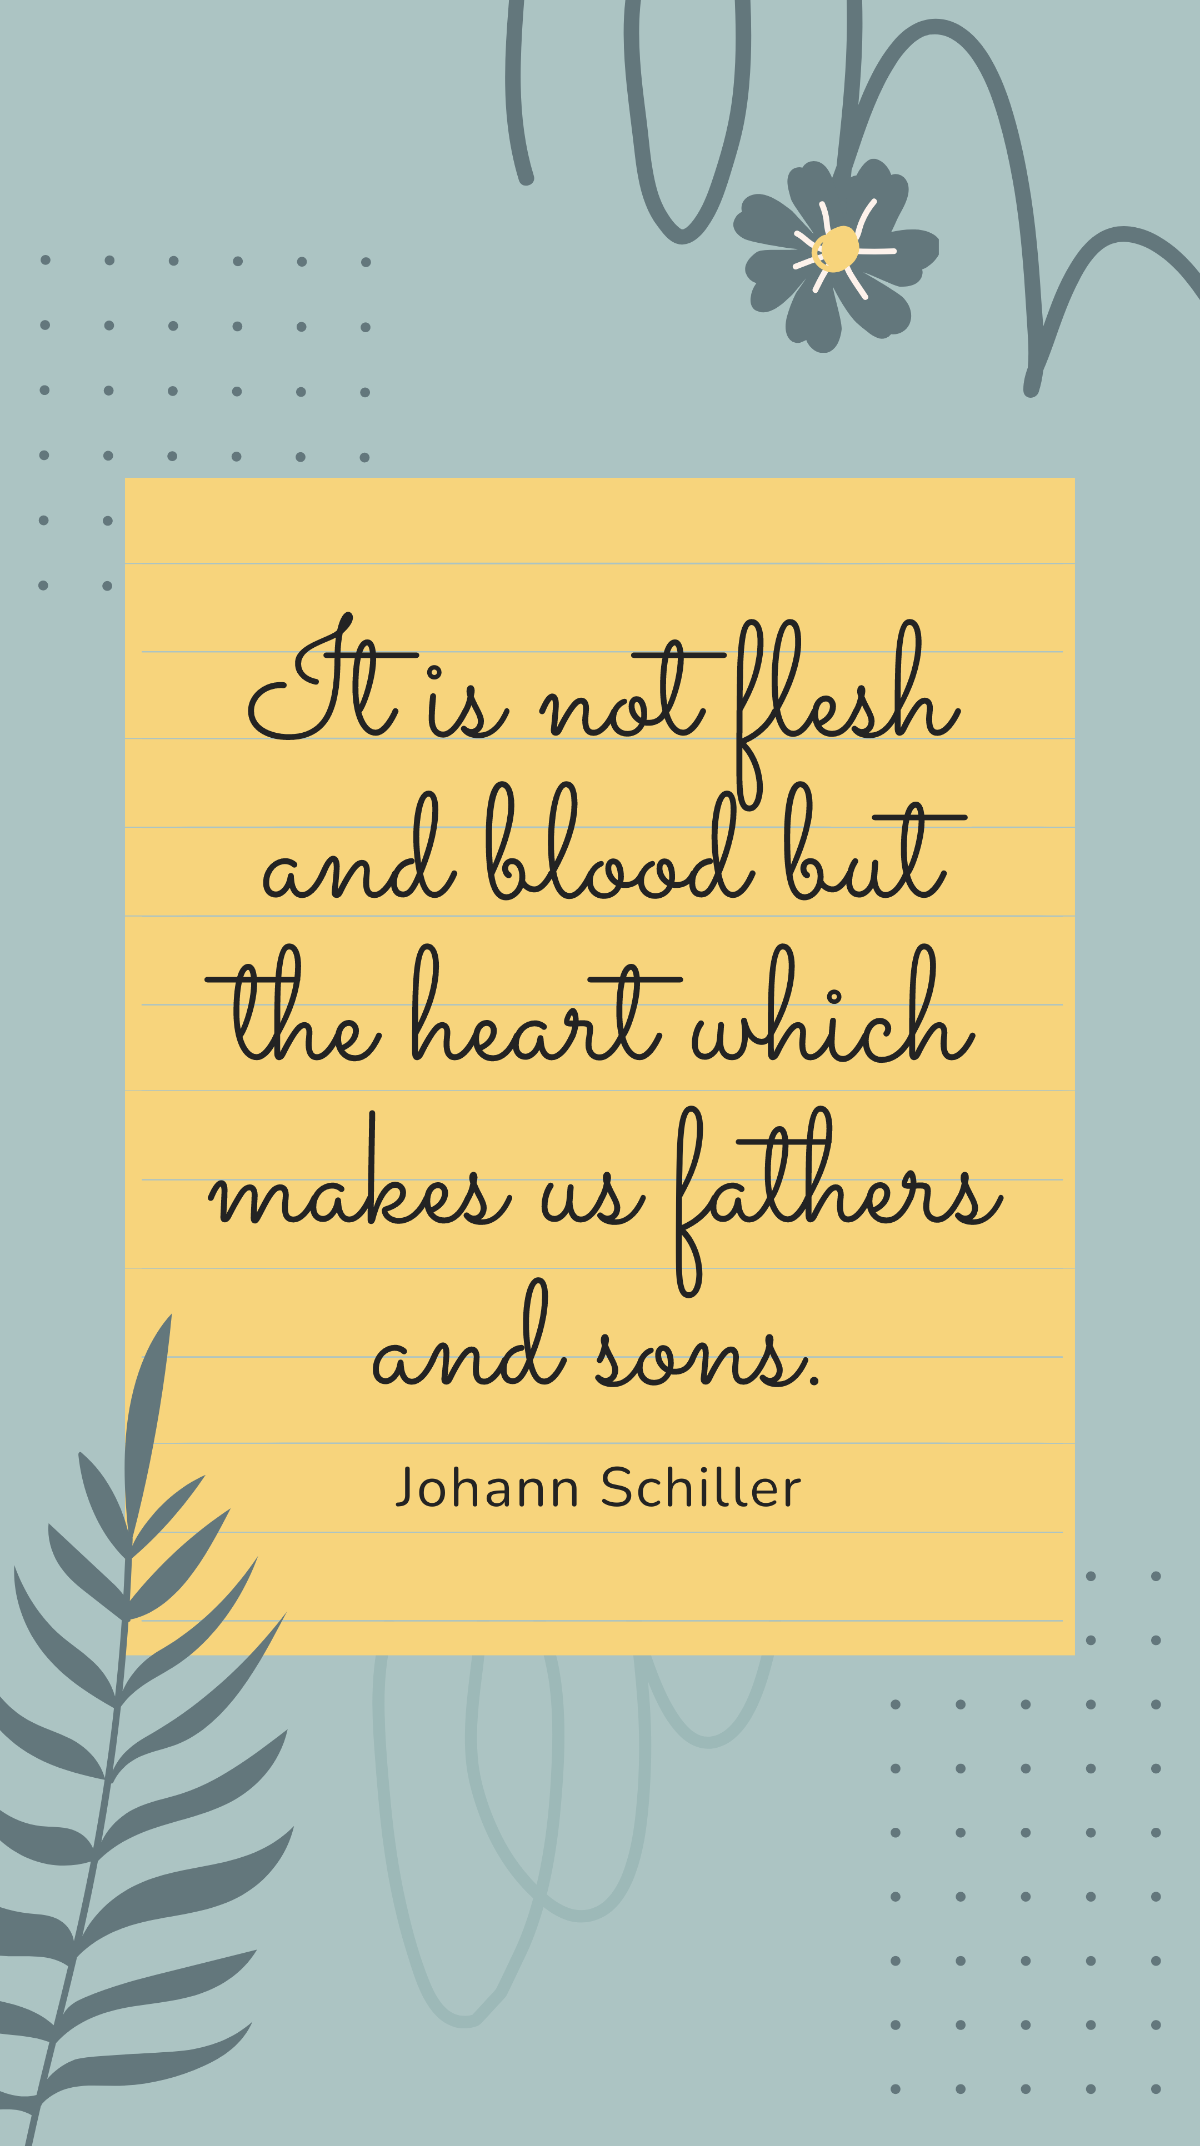 Johann Schiller - It is not flesh and blood but the heart which makes us fathers and sons. Template